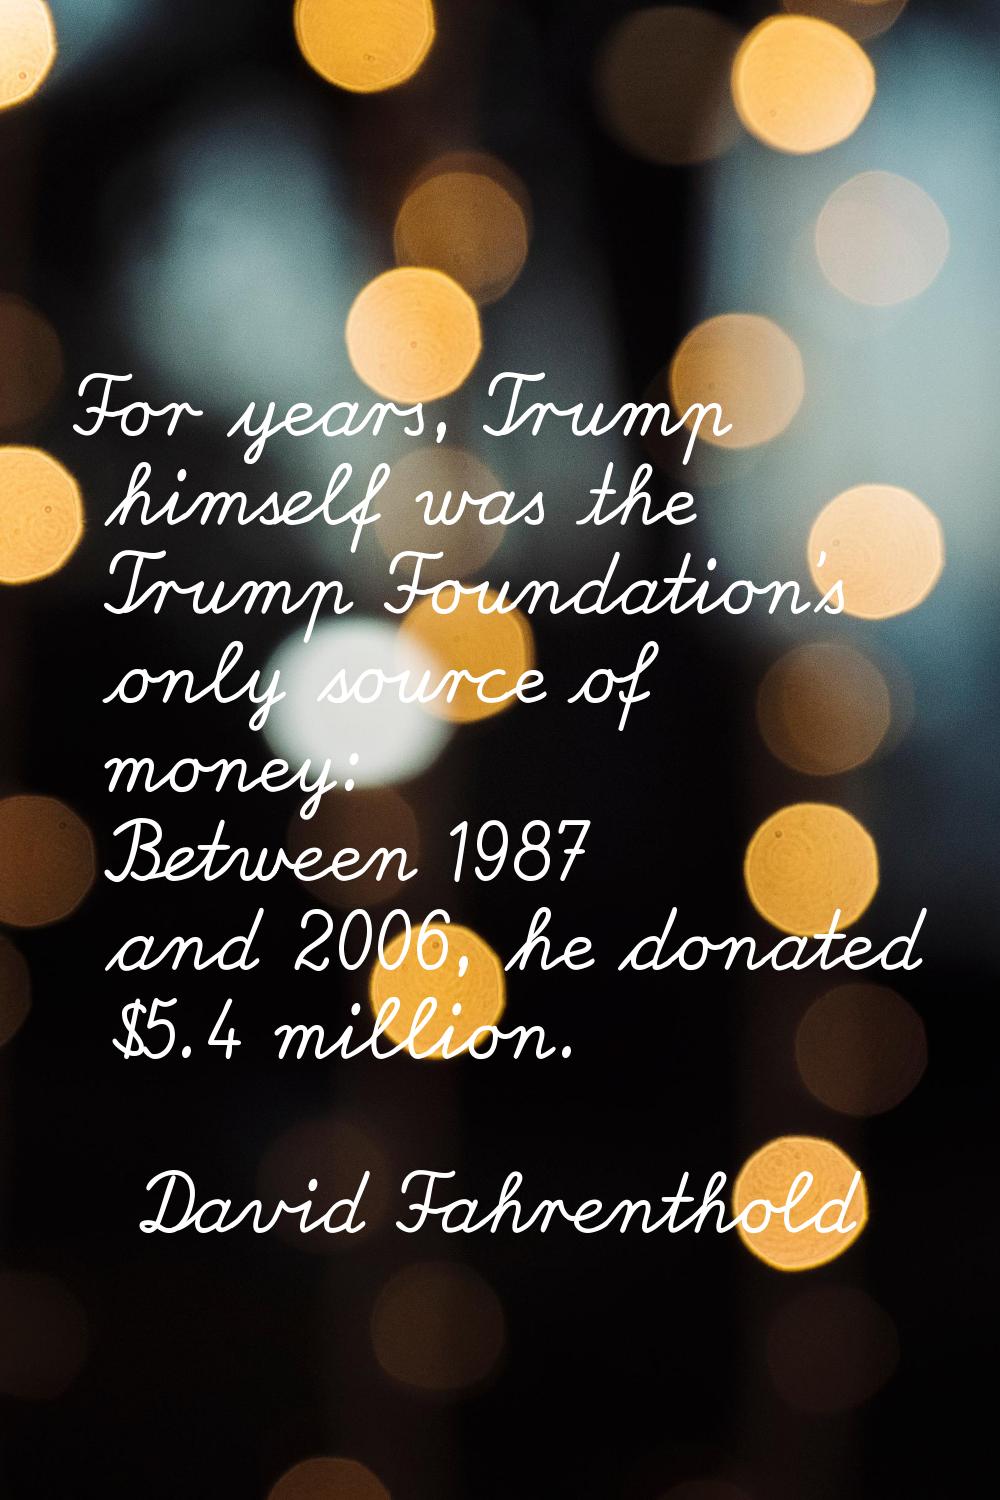 For years, Trump himself was the Trump Foundation's only source of money: Between 1987 and 2006, he